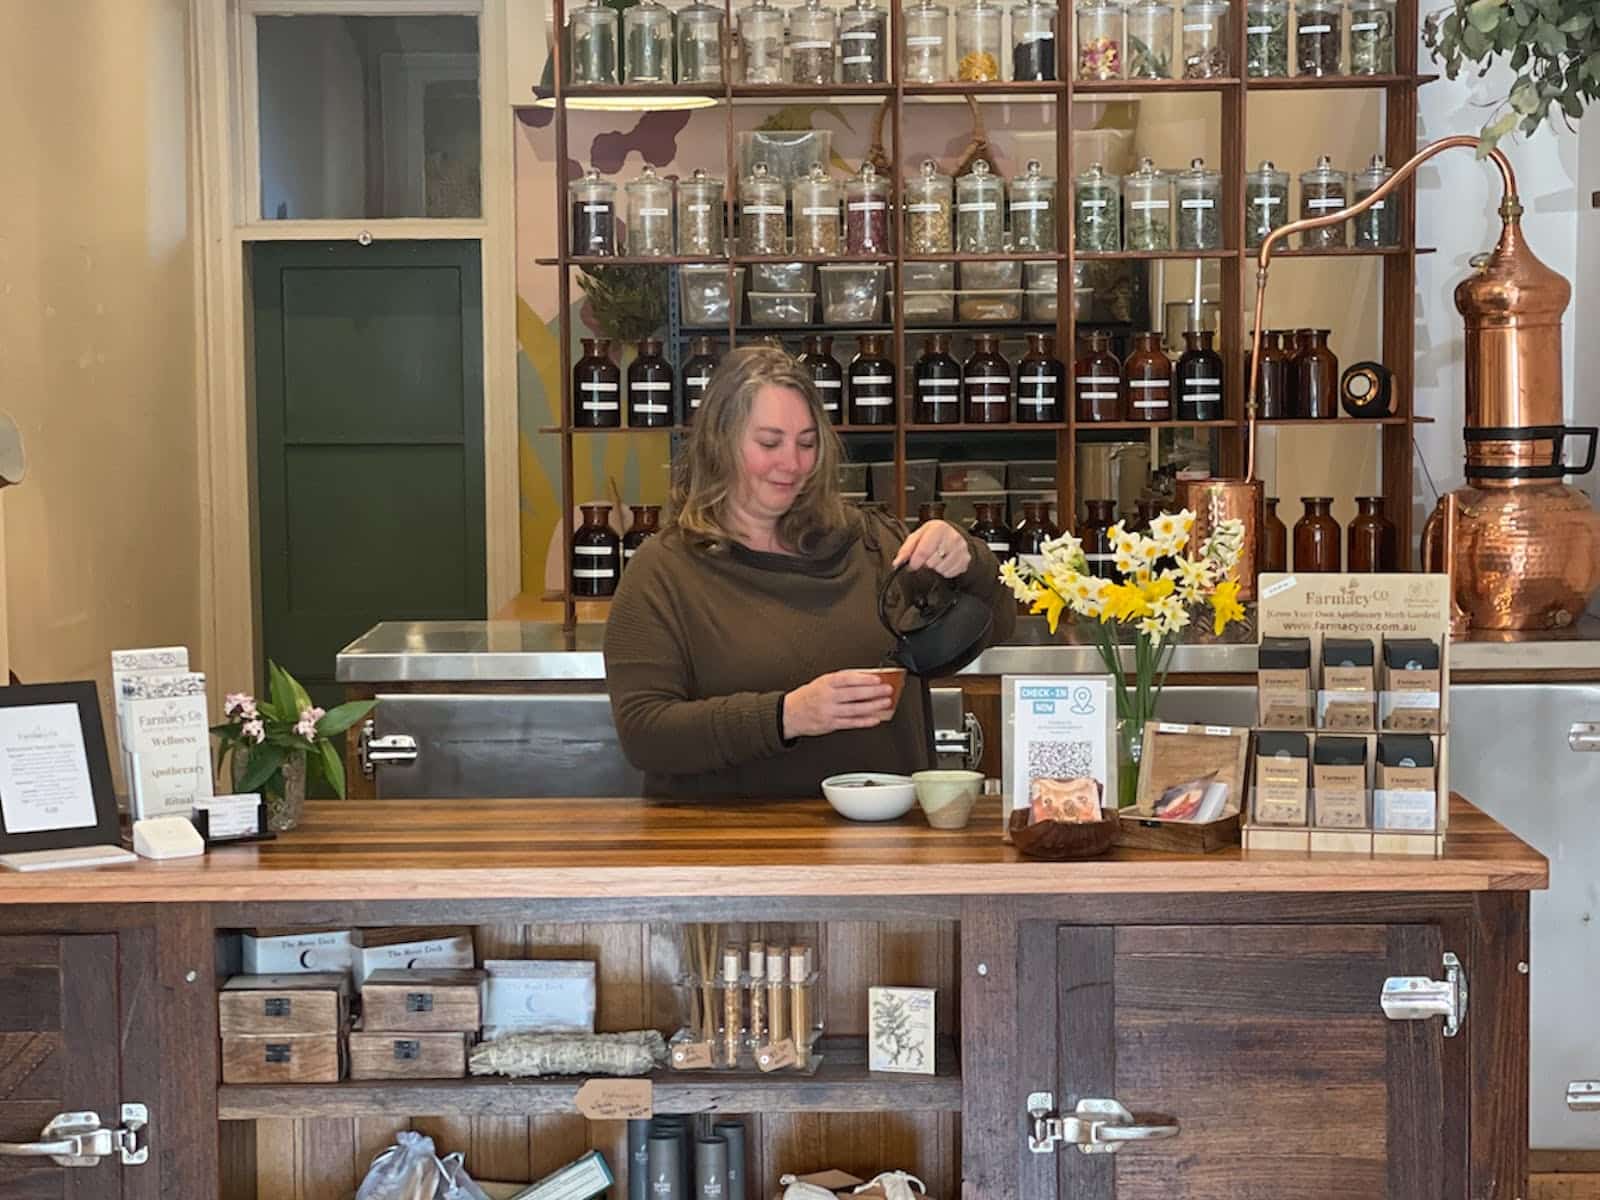 Lady standing behind a counter pouring tea